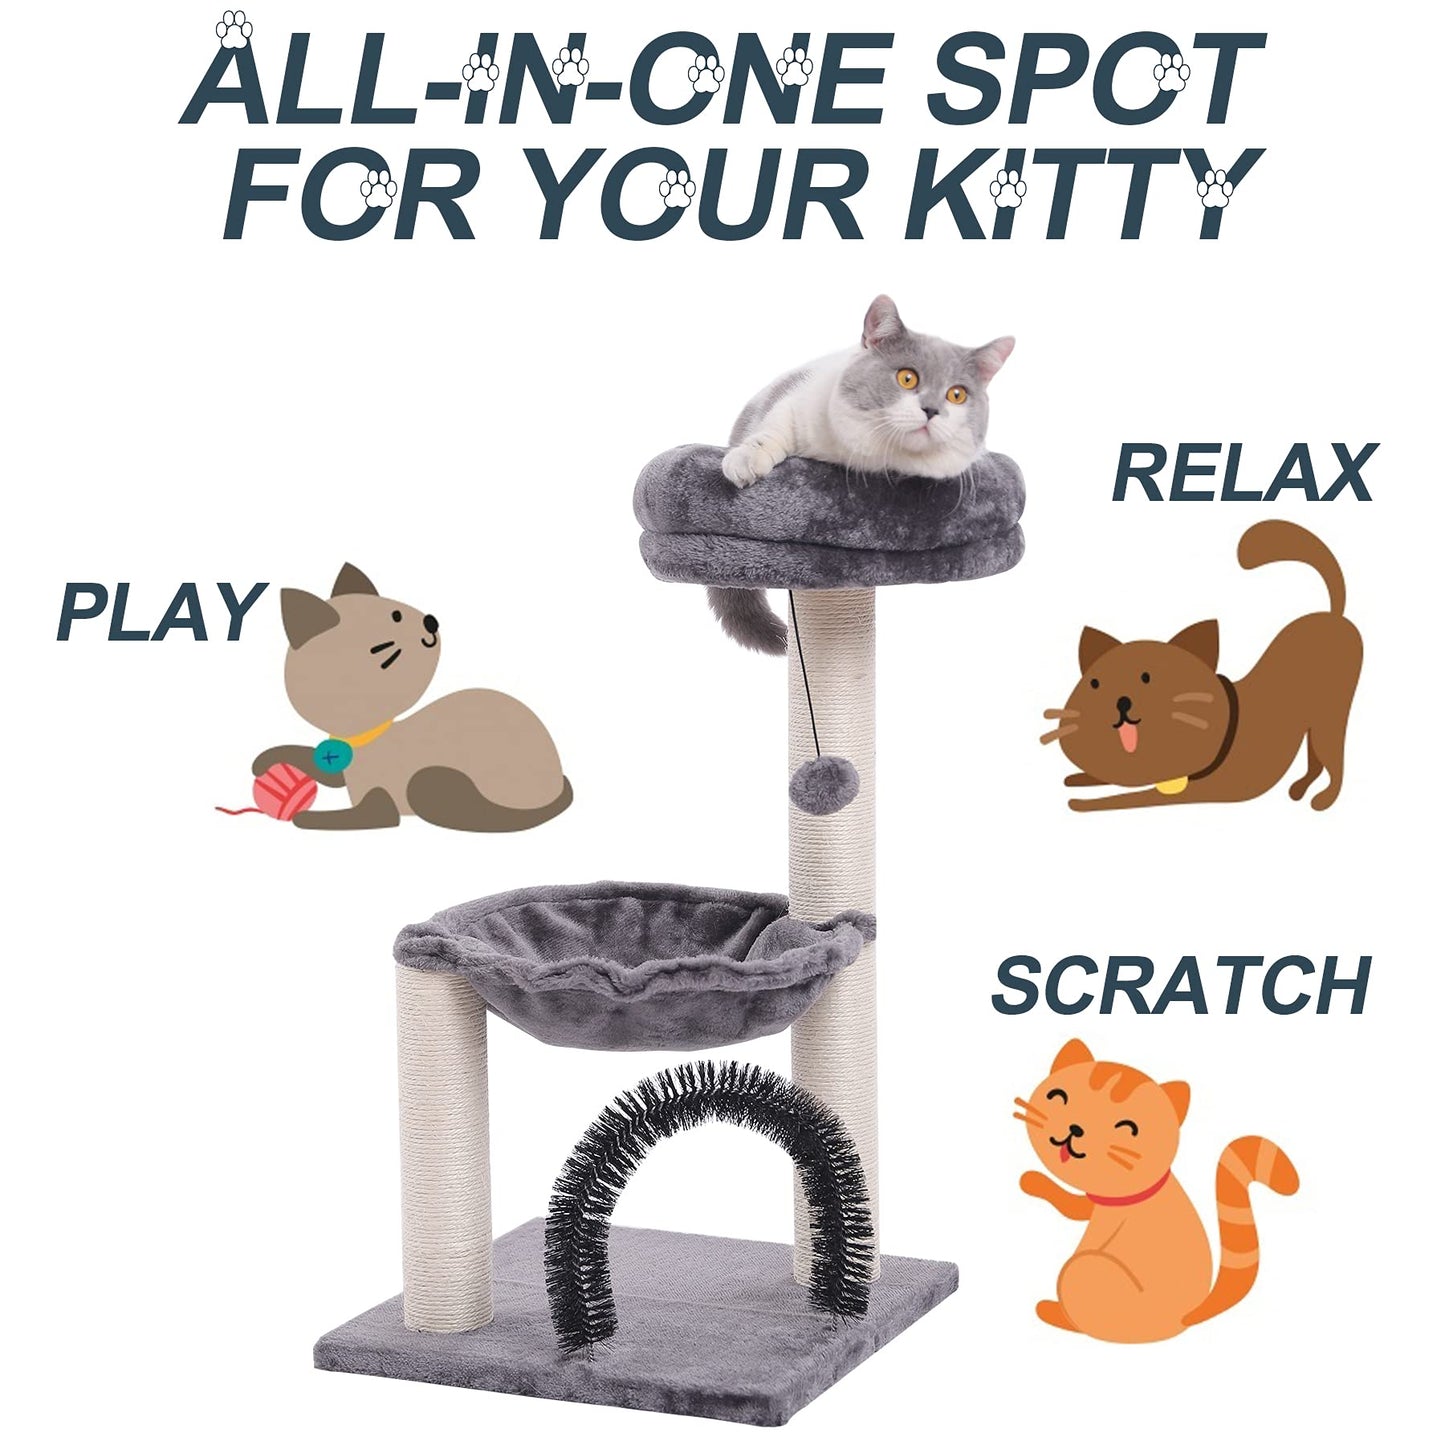 HOOPET cat Tree,27.8 INCHES Tower for Indoor Cats, Multi-Level Cat Tree with Scratching Posts Plush Basket & Perch Play Rest, Activity Dangling Ball Kittens/Small Cats